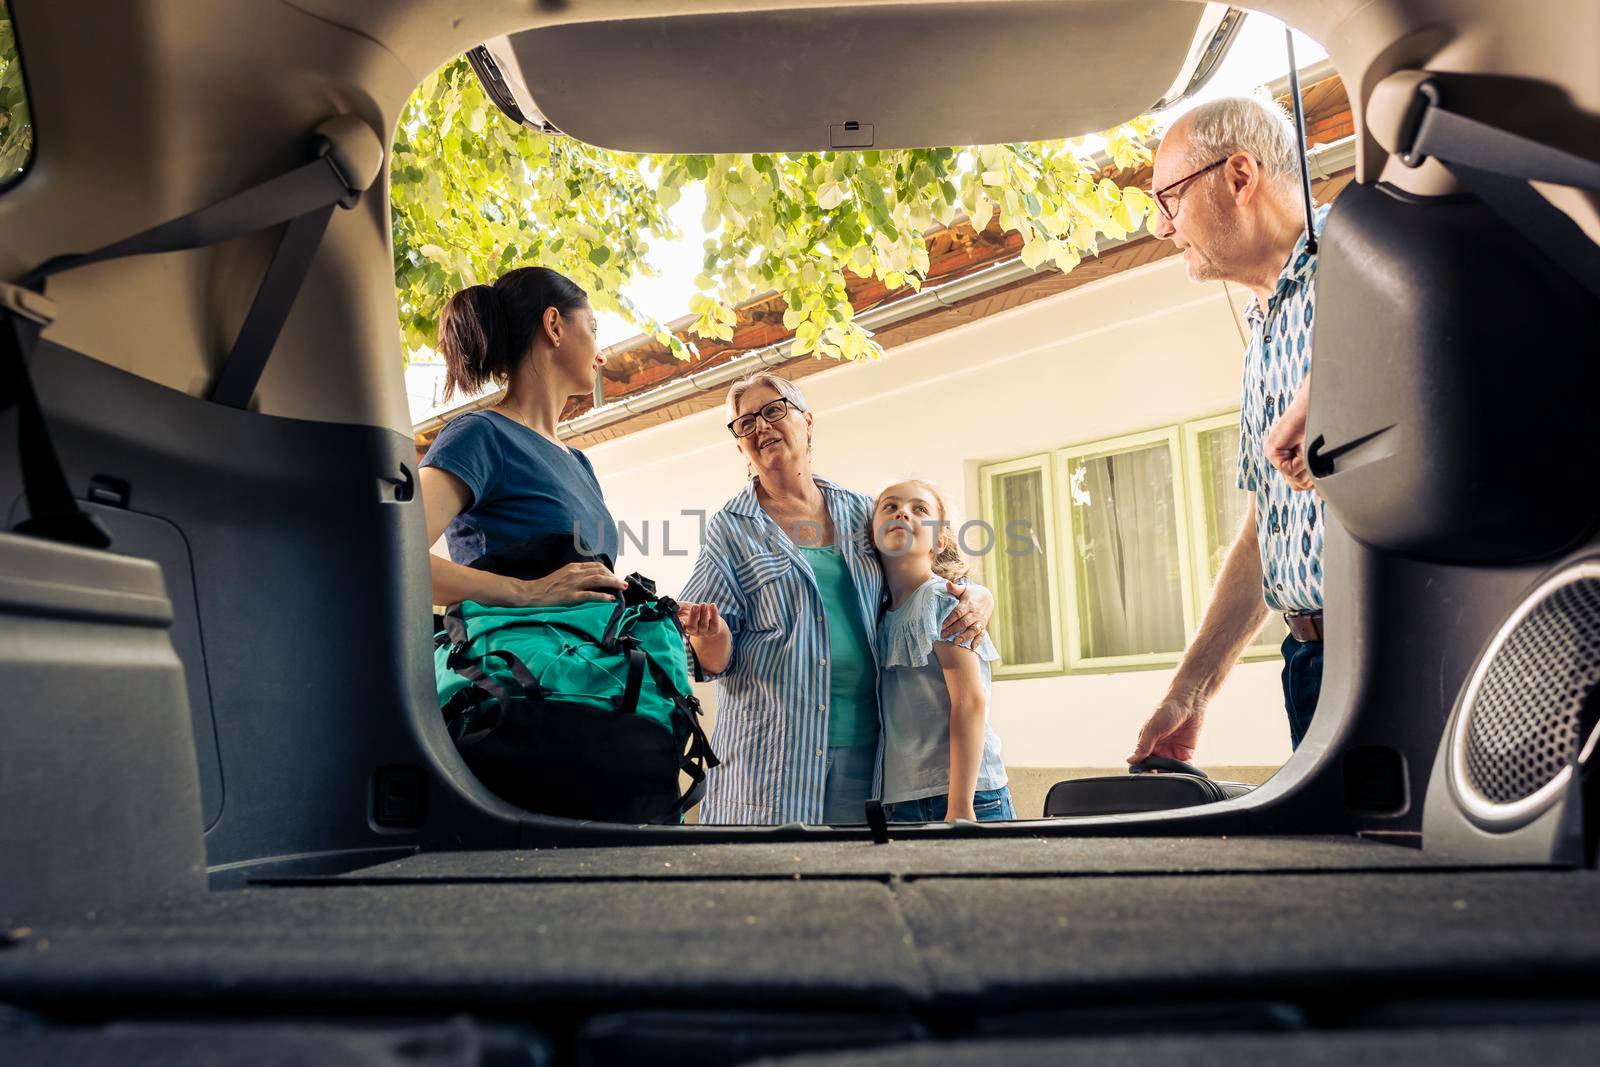 Caucasian family going on seaside holiday with luggage and bags, loading baggage in automobile trunk. Little girl with mother and grandparents travelling on vacation trip with vehicle.